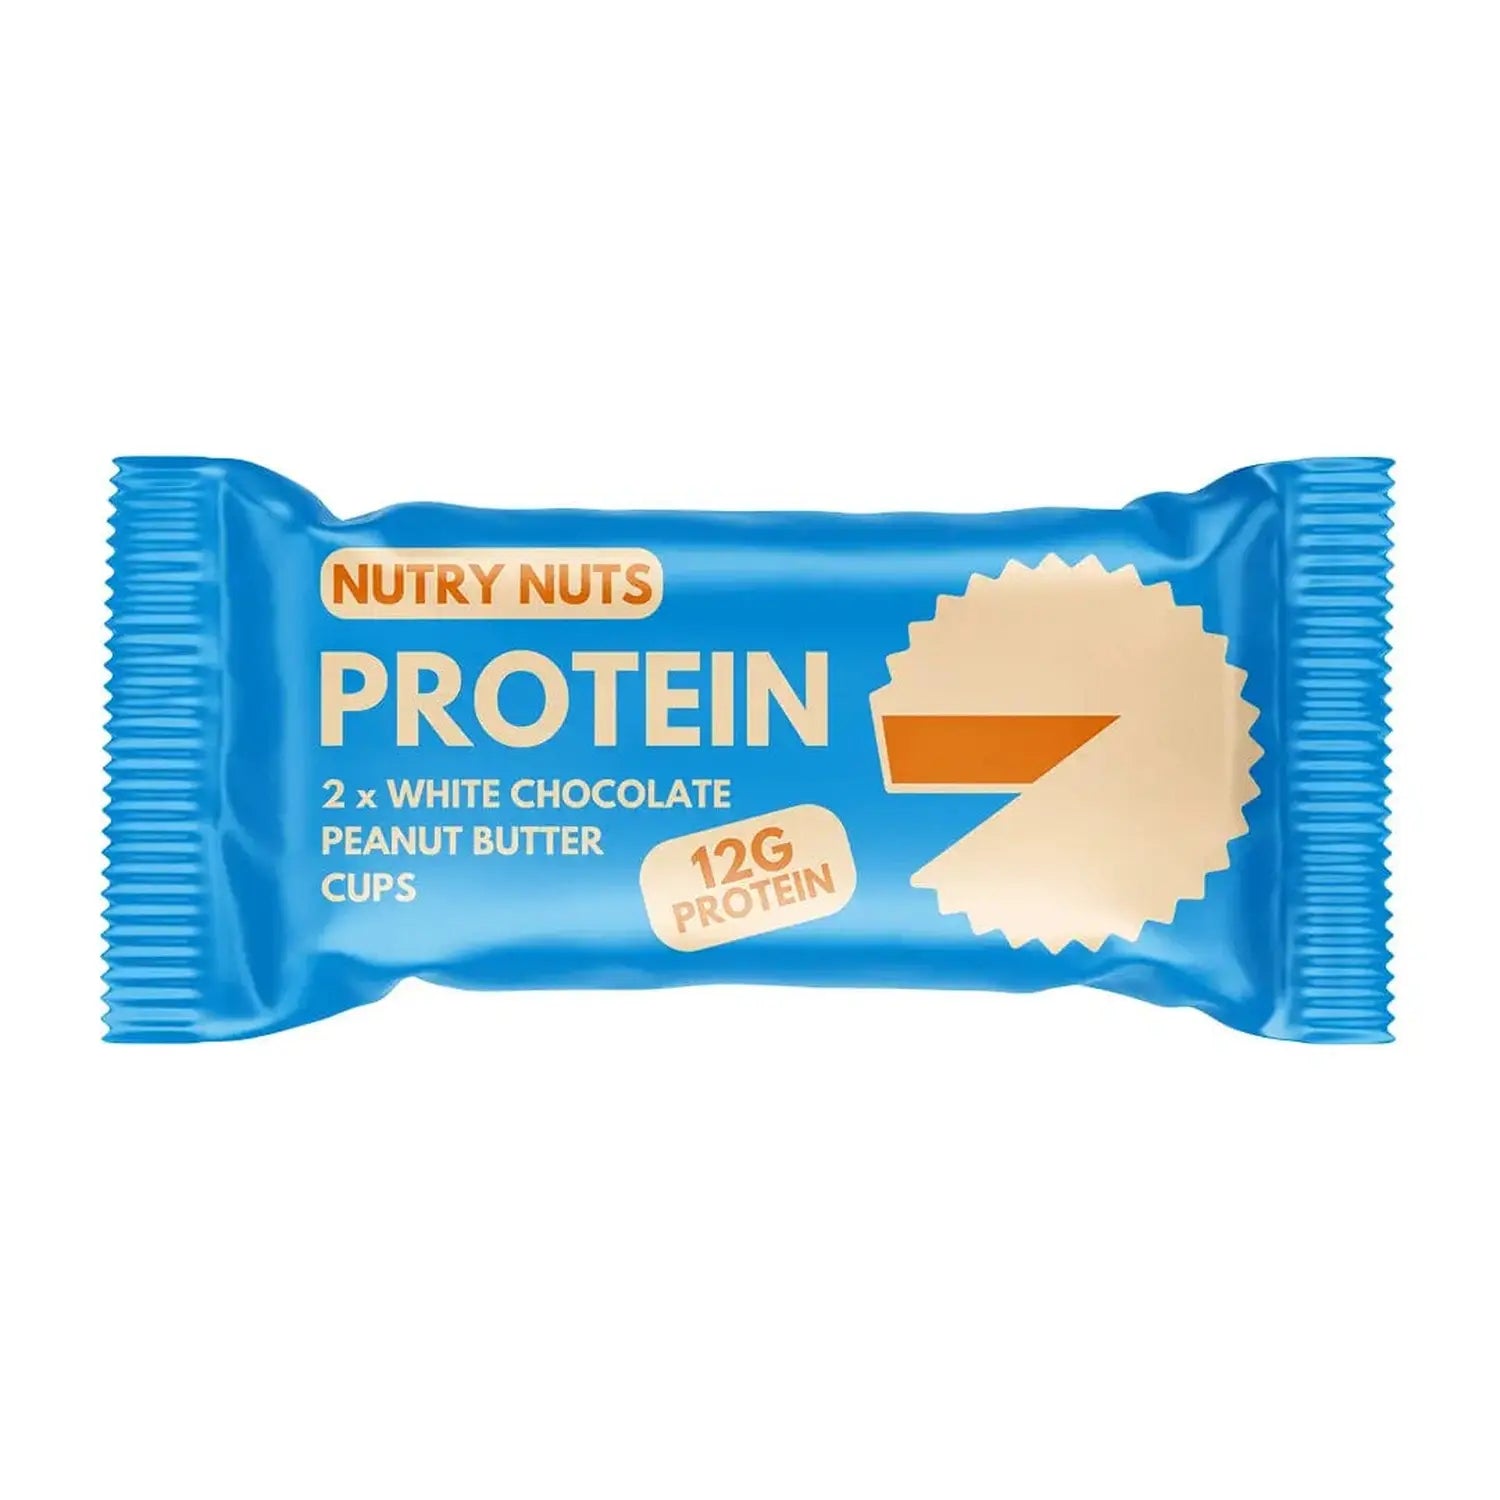 Nutry Nuts Nutry Nuts - Protein Peanut Butter Cups 42 g White Chocolate kaufen bei HighPowered.ch